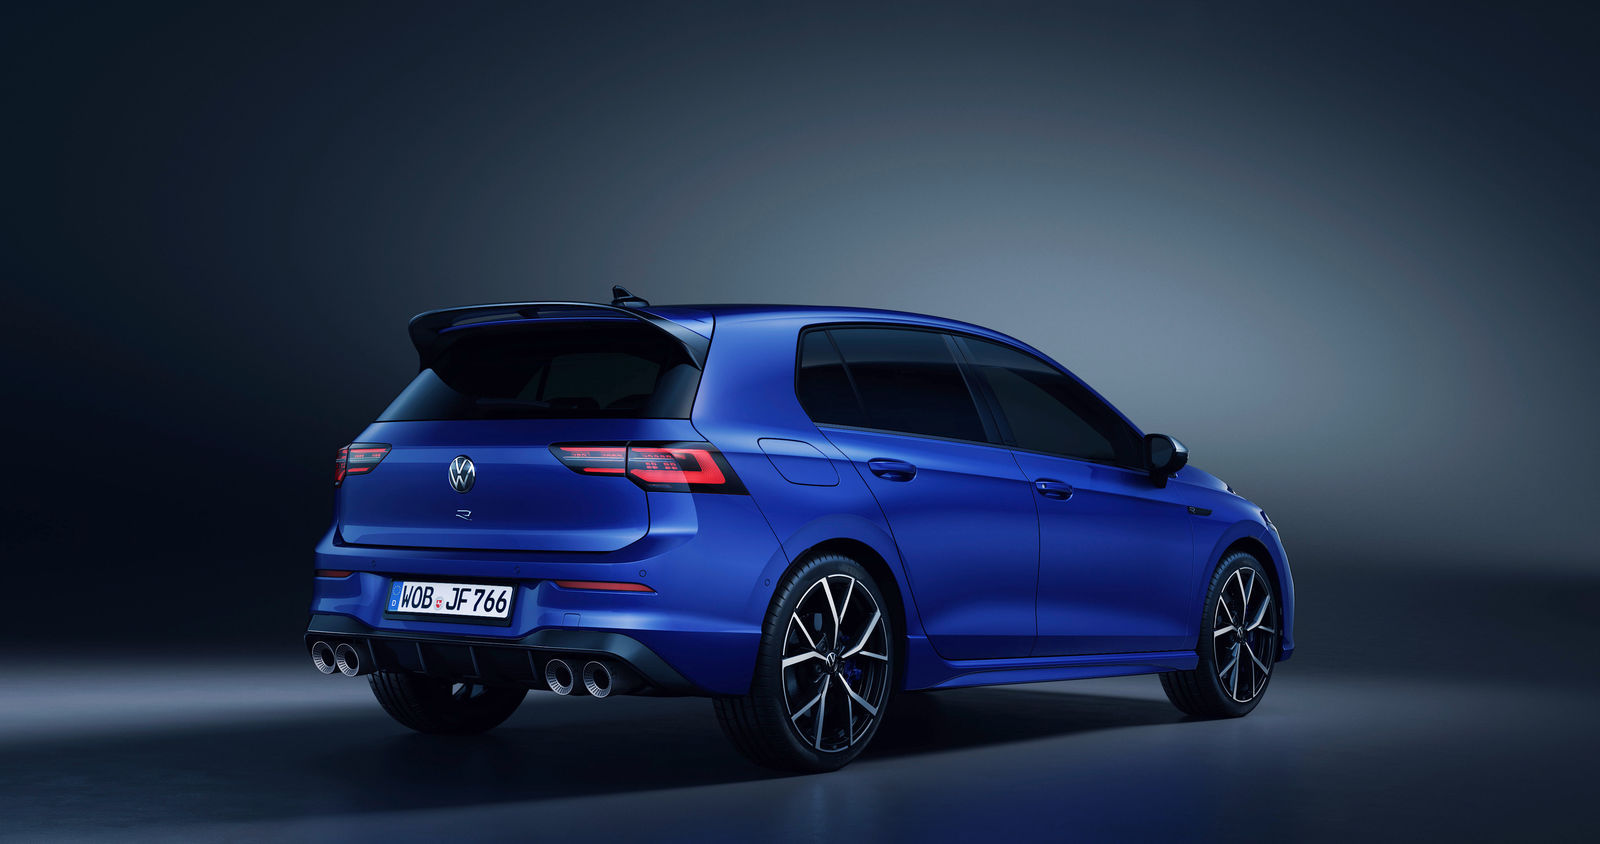 The guide for Golf 7 R engines with standard 300 PS